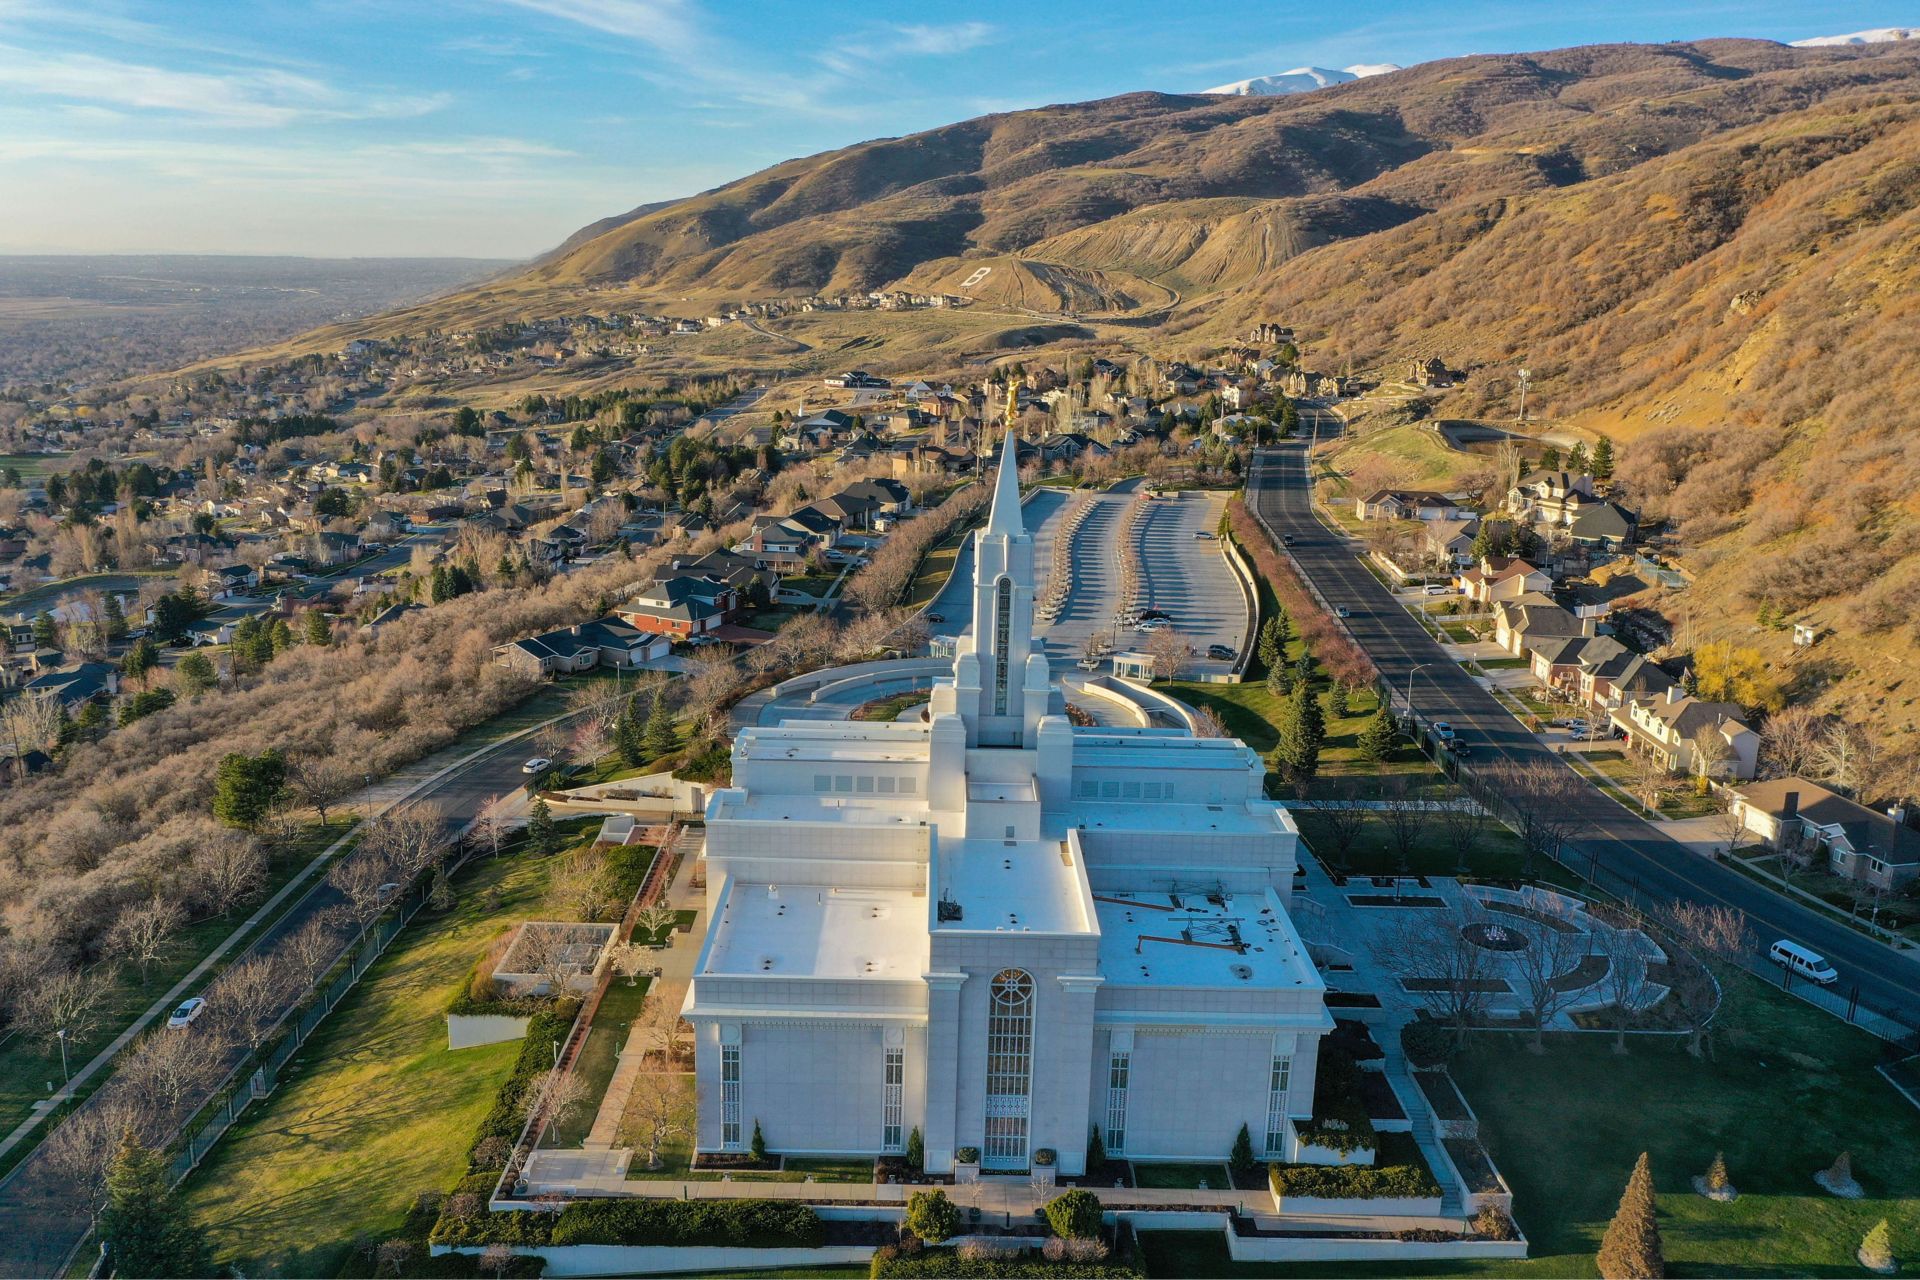 Aerial view of Bountiful Temple with a white membrane Sarnafil Roof. Mountains and residential houses can be seen in the background. 